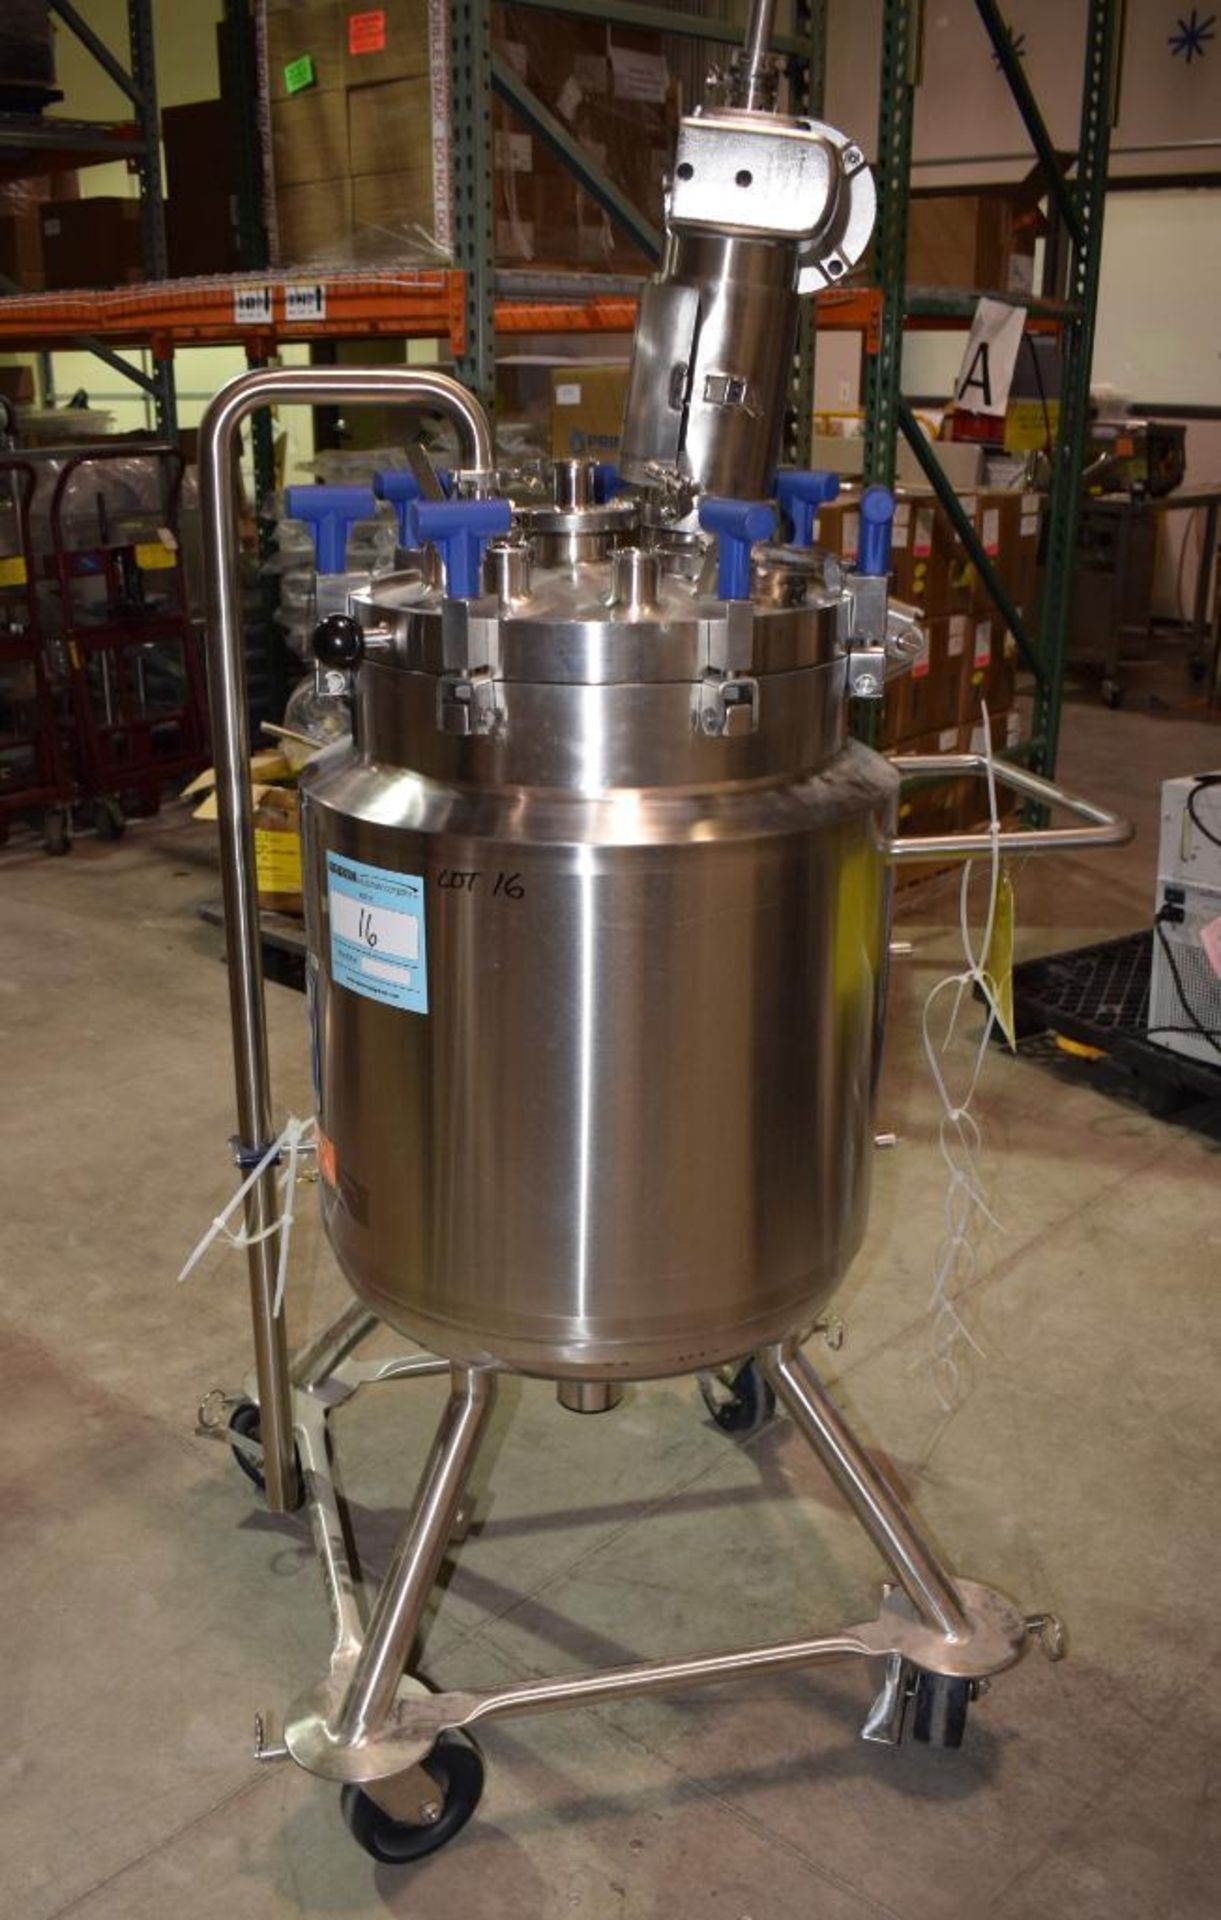 Feldmeier Pressure Tank, Approximate 80 Liter (21 Gallon), 316L Stainless Steel. Approximate 18" dia - Image 2 of 10